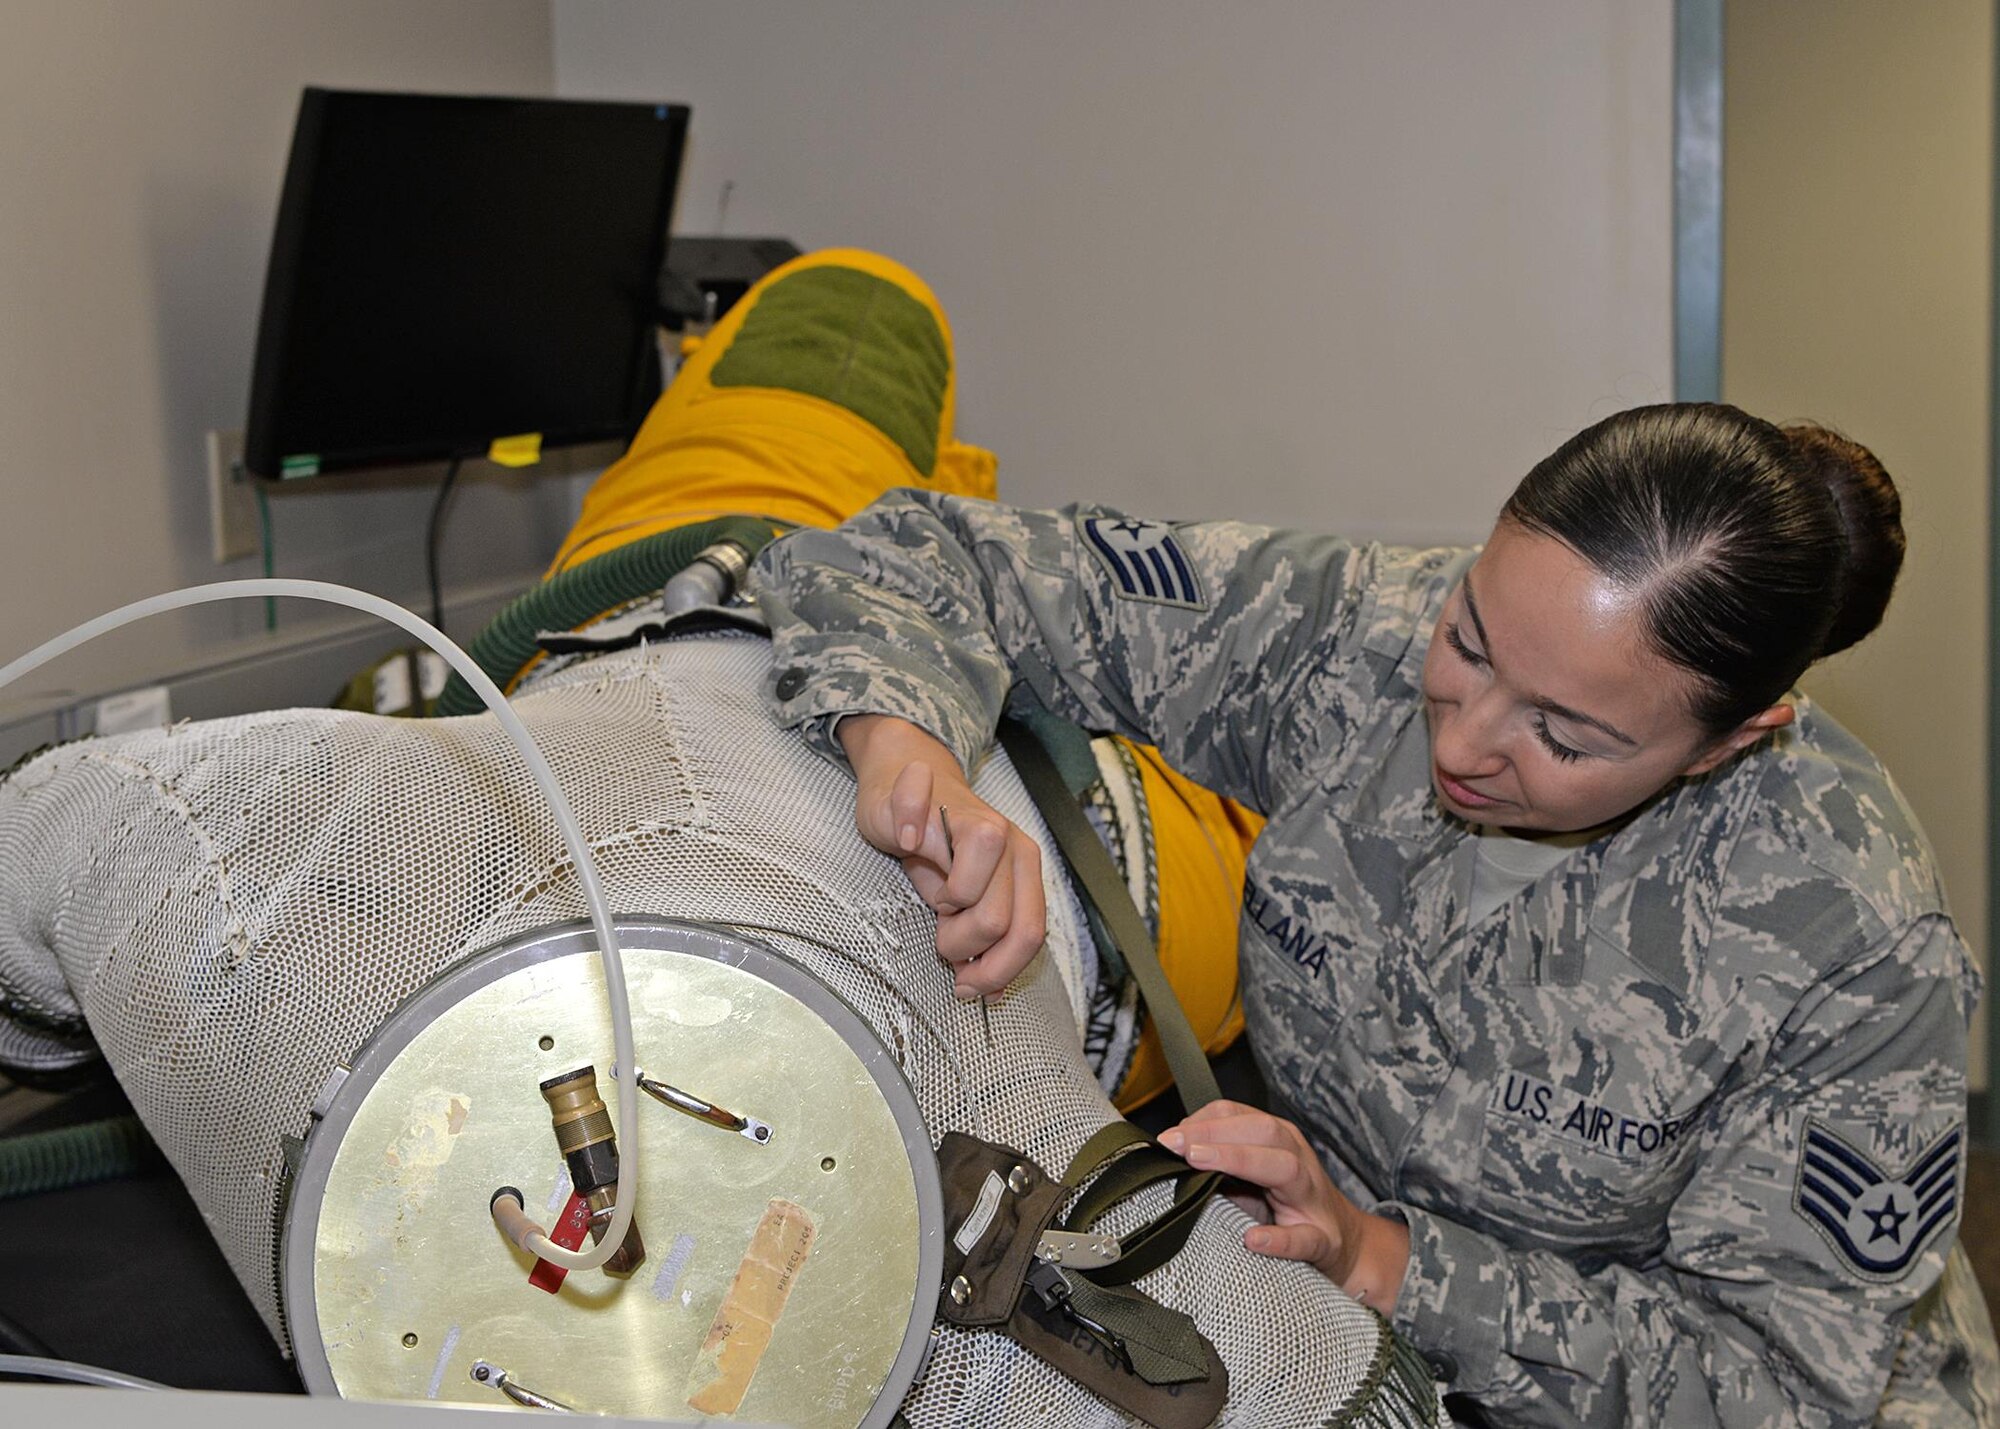 Staff Sgt. Julie Orellana, 9th Physiological Support Squadron full pressure suit technician, inspects and repairs the weave net on a full pressure suit Aug. 31, 2016, at Beale Air Force Base, California. The weave net helps the suit maintain its shape and stops it from over expanding. (U.S. Air Force photo/Airman Tristan D. Viglianco)